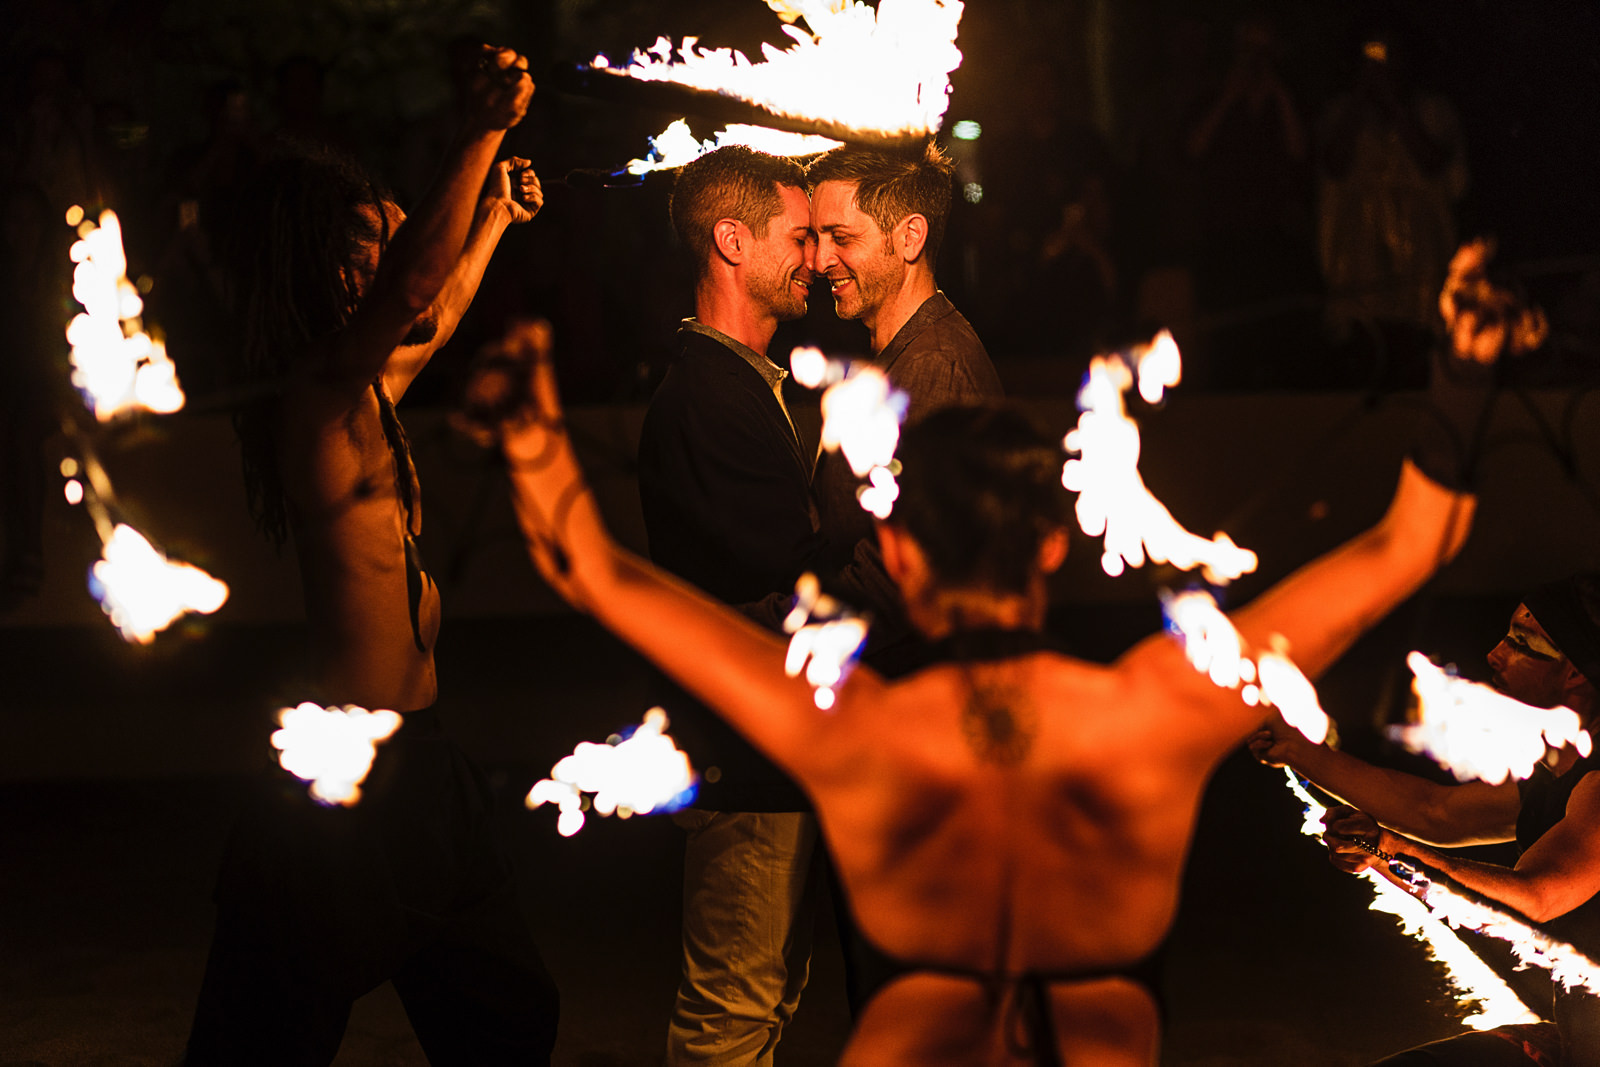 Gay couple in the middle of fire dancers as part of the entertainment during the rehearsal dinner celebration